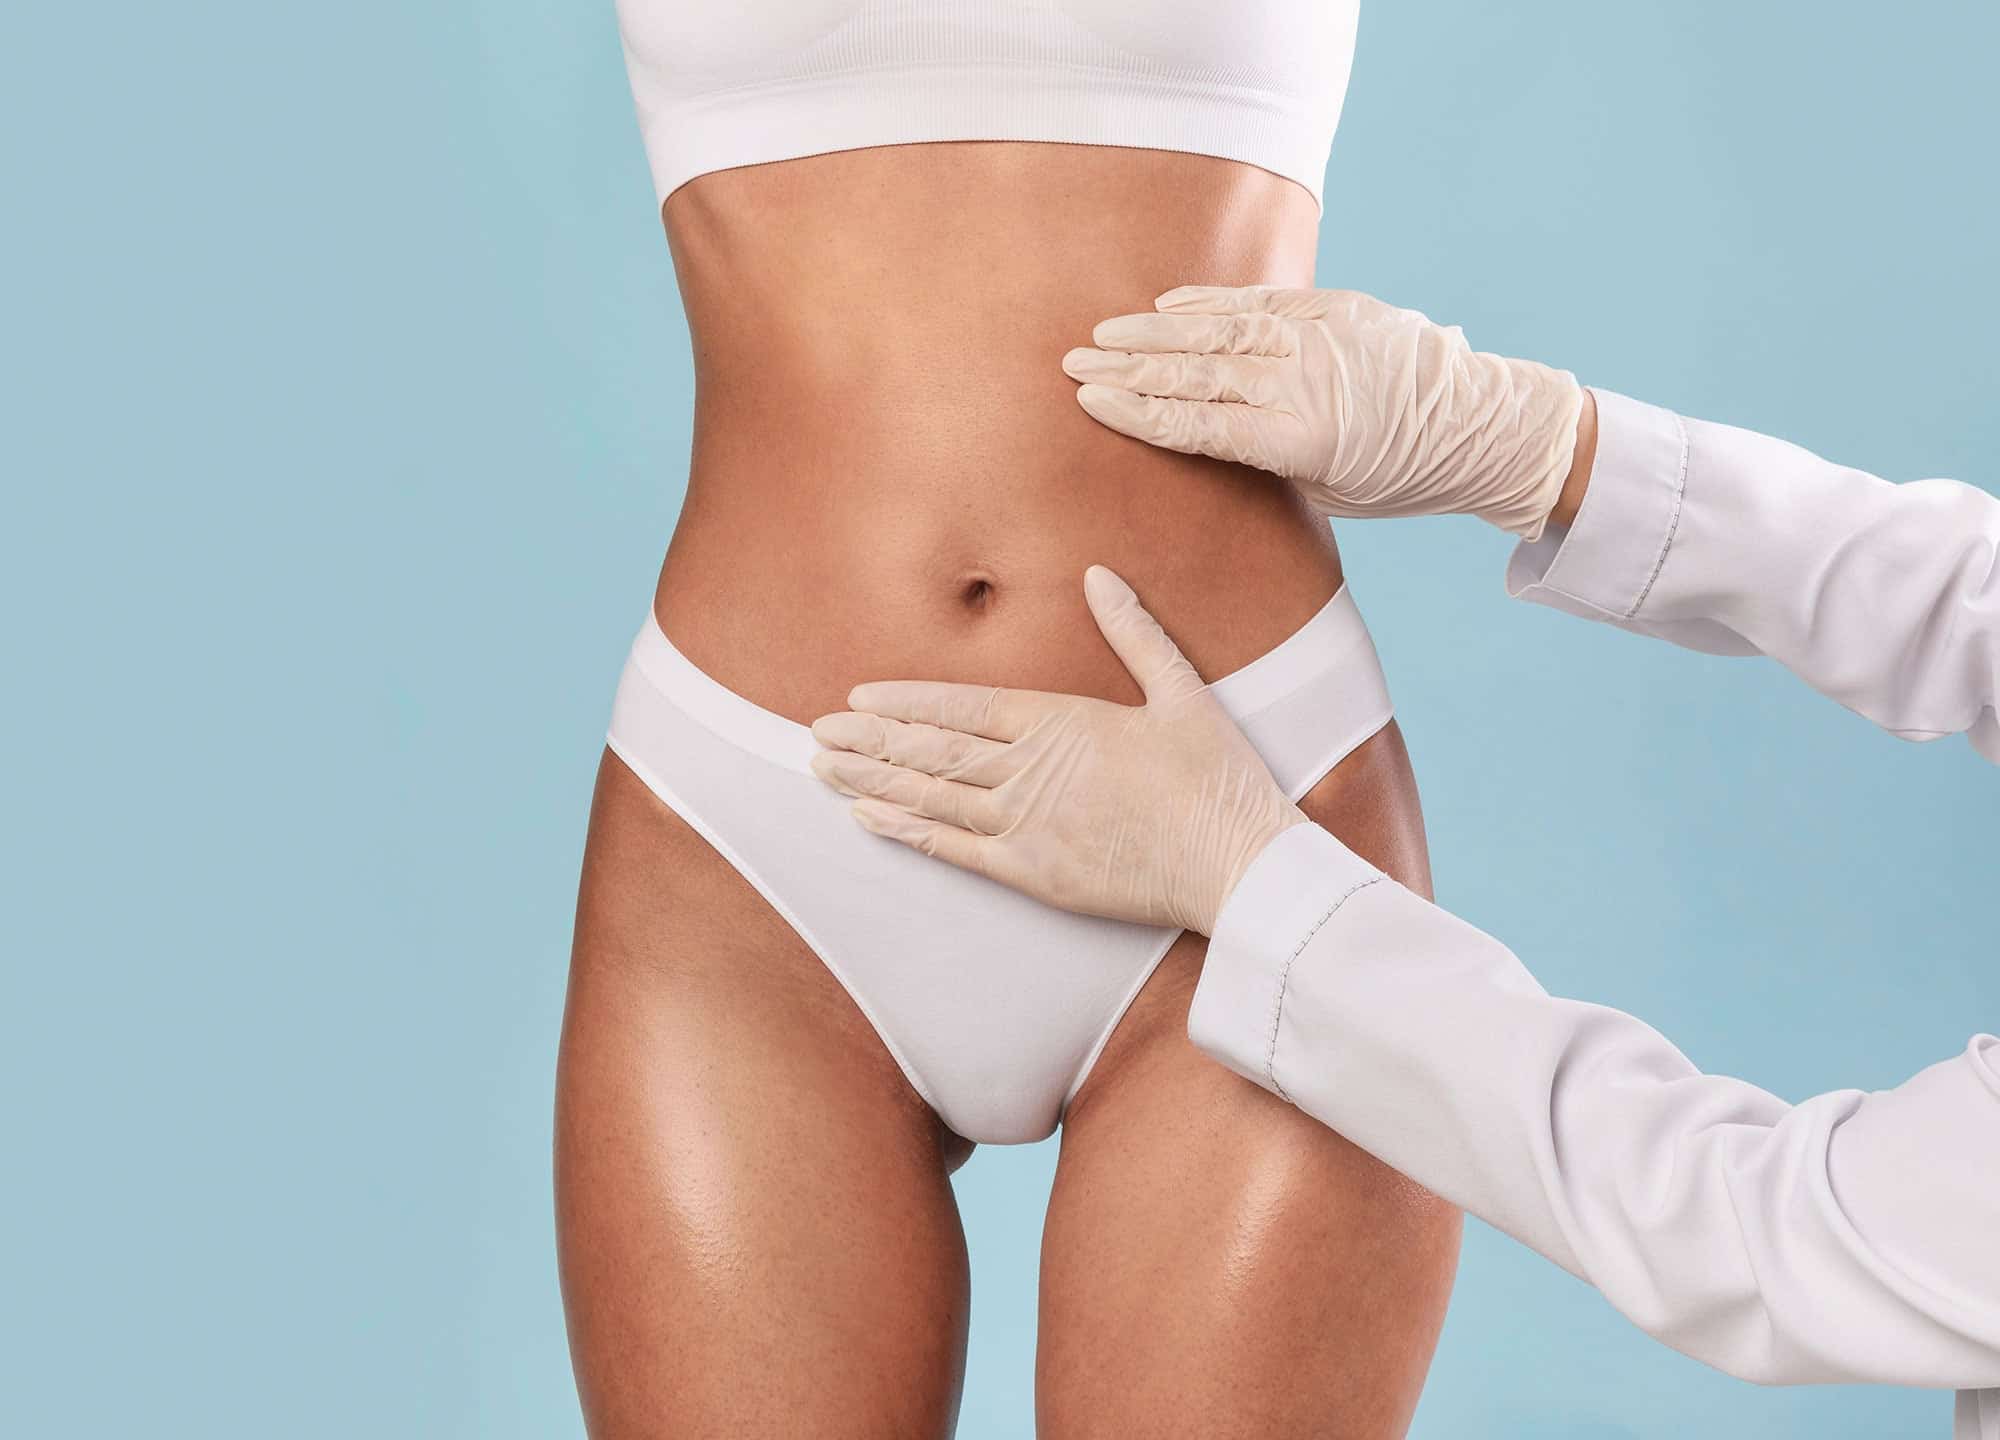 Coolsculpting Before and After Results From Actual Patients